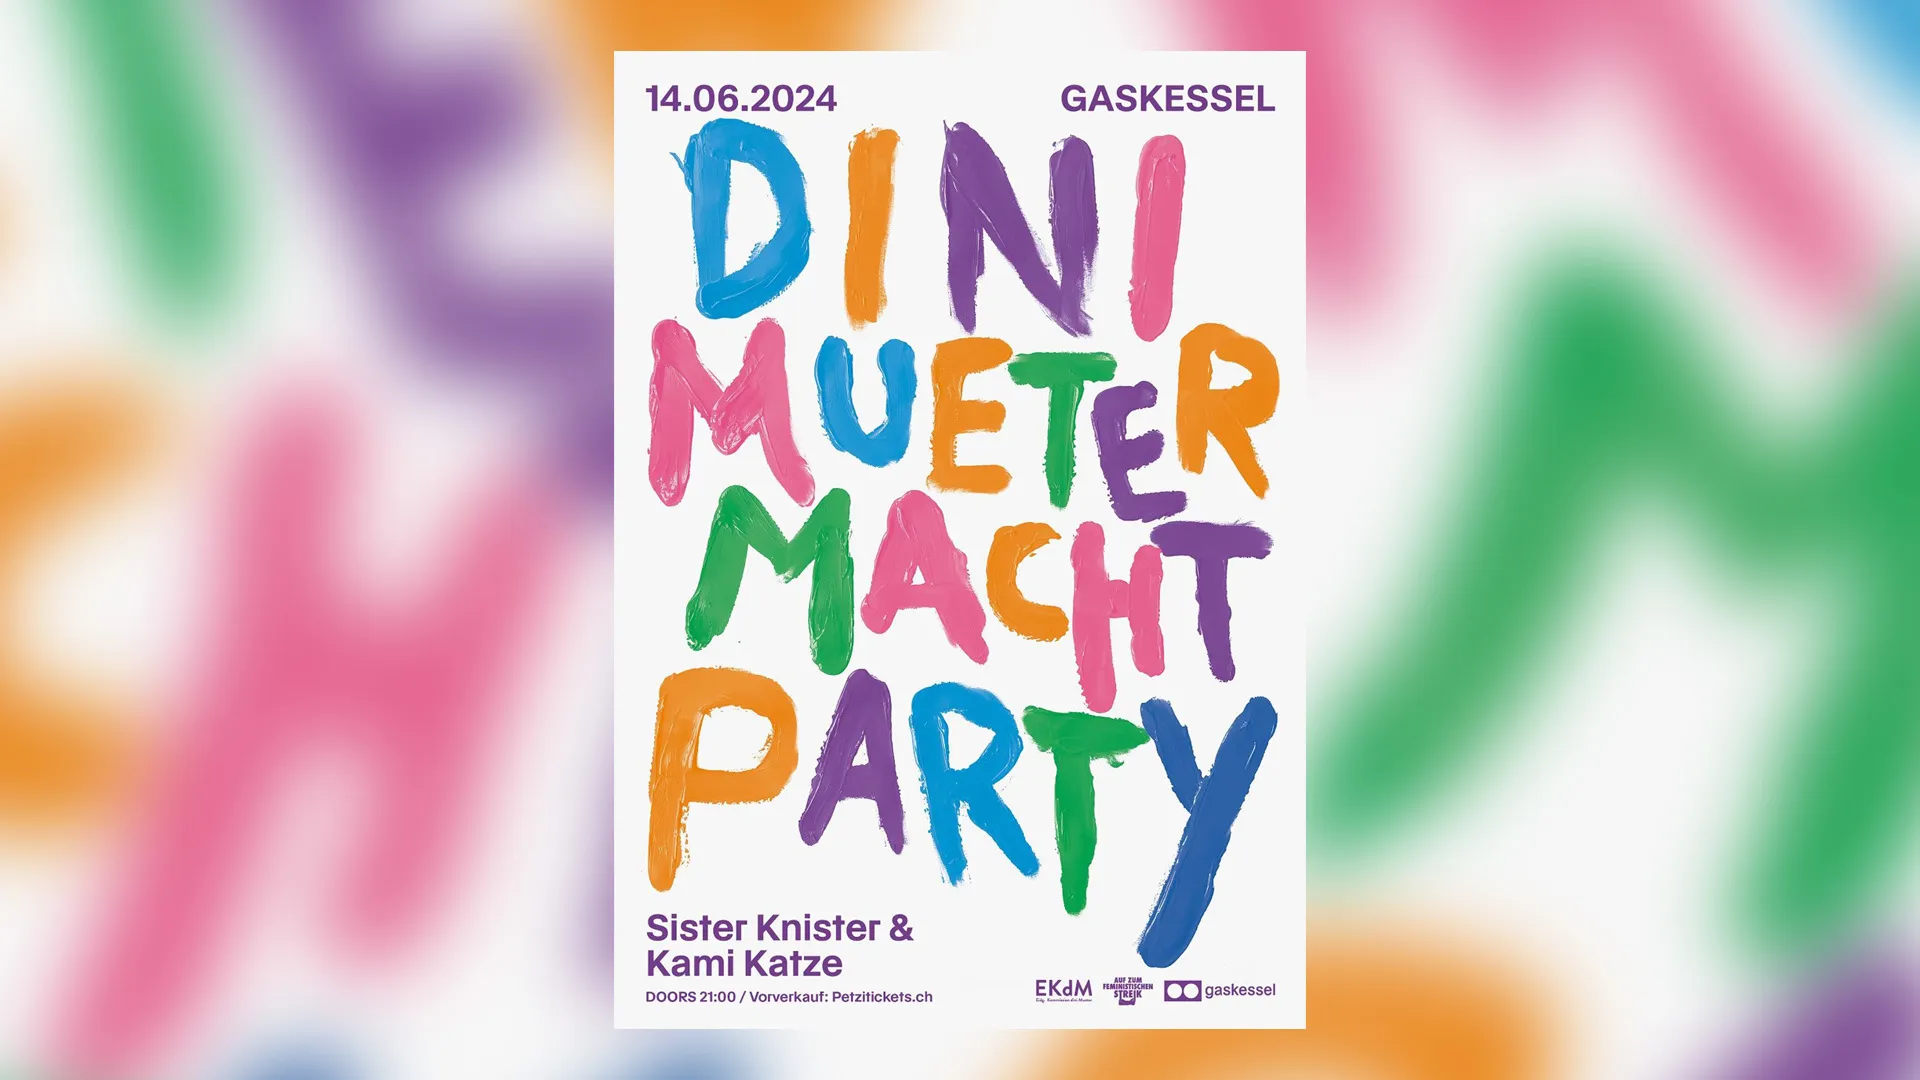 Dini Mueter macht Party